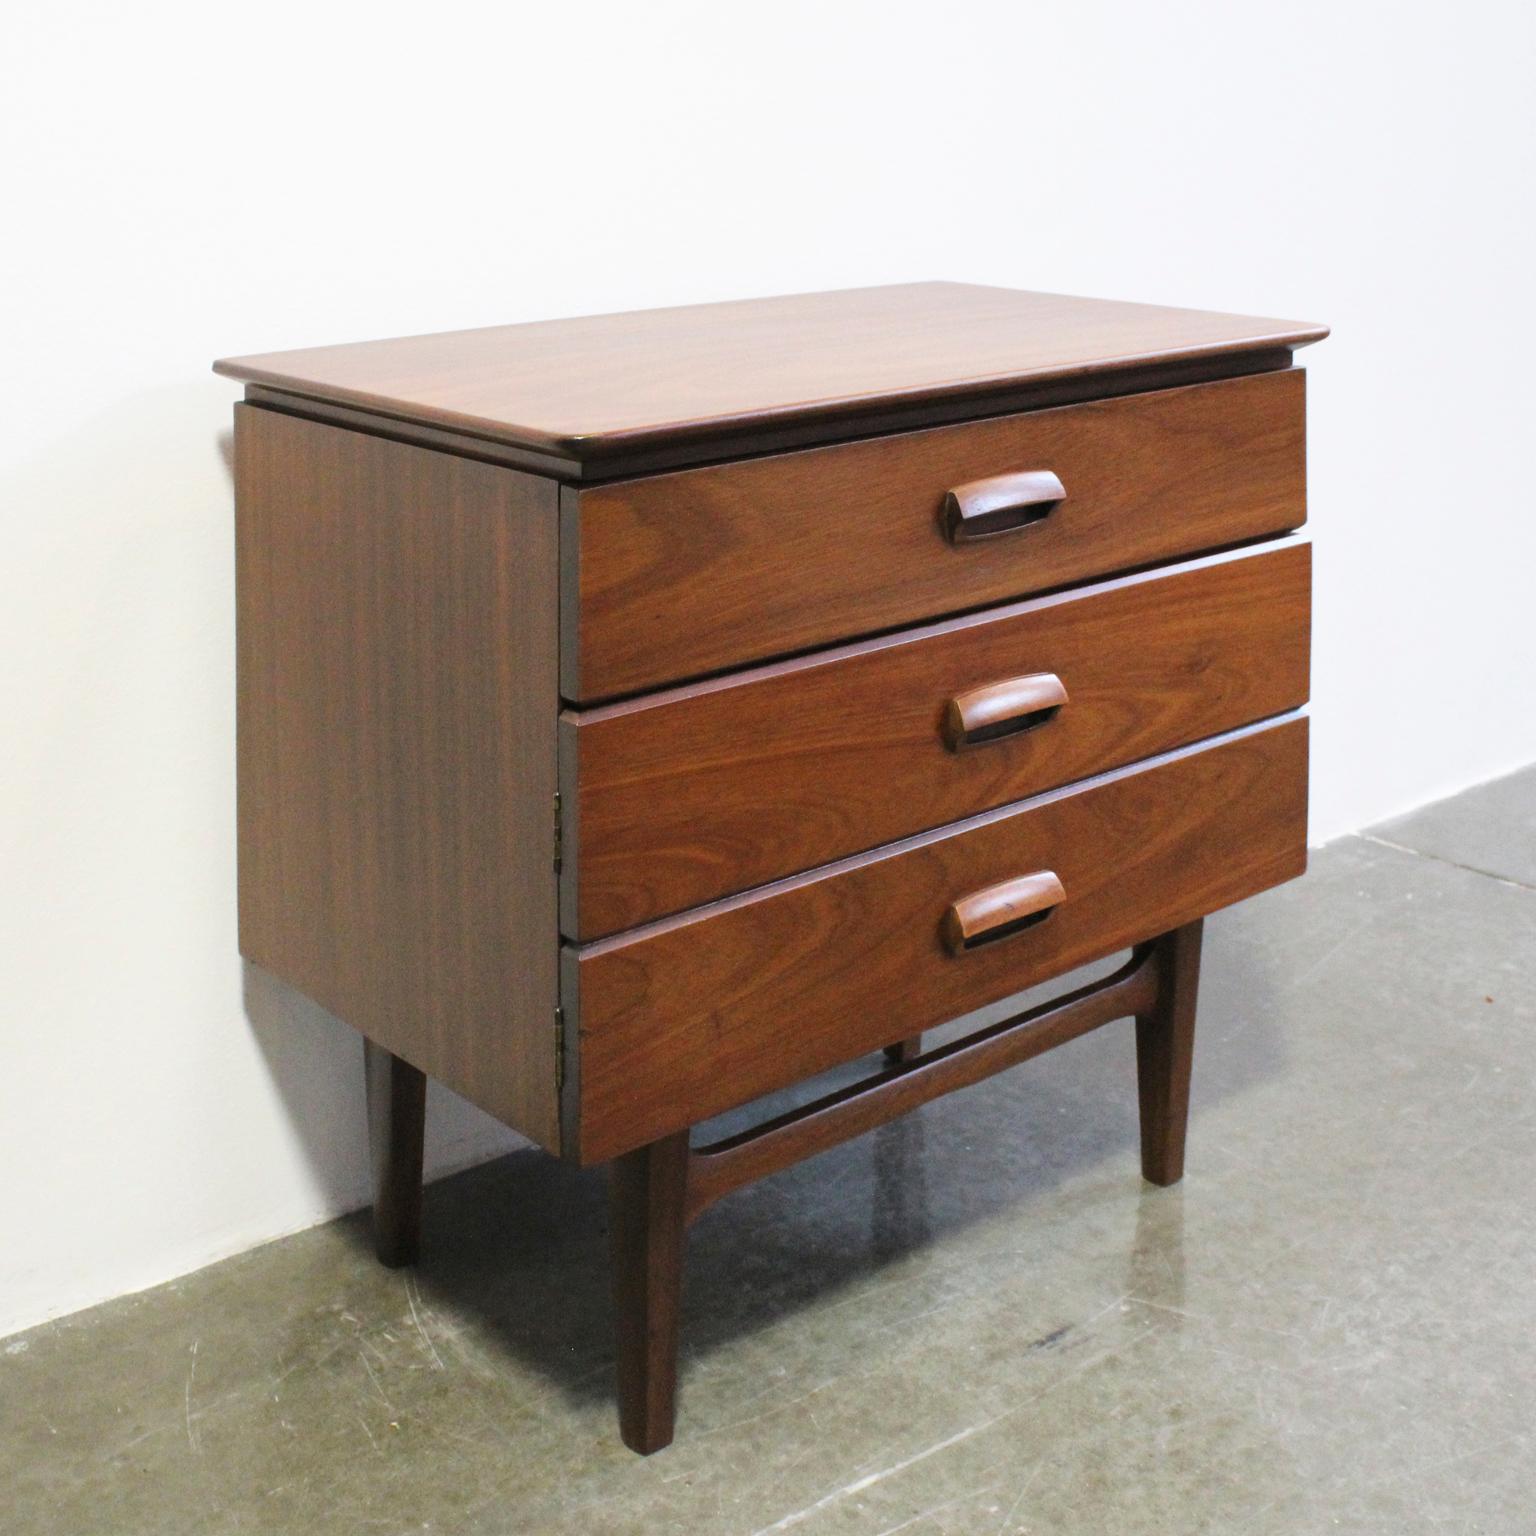 1960s modern Portuguese bedside tables from Olaio Portuguese factory. This piece was designed by José Espinho and belongs to 